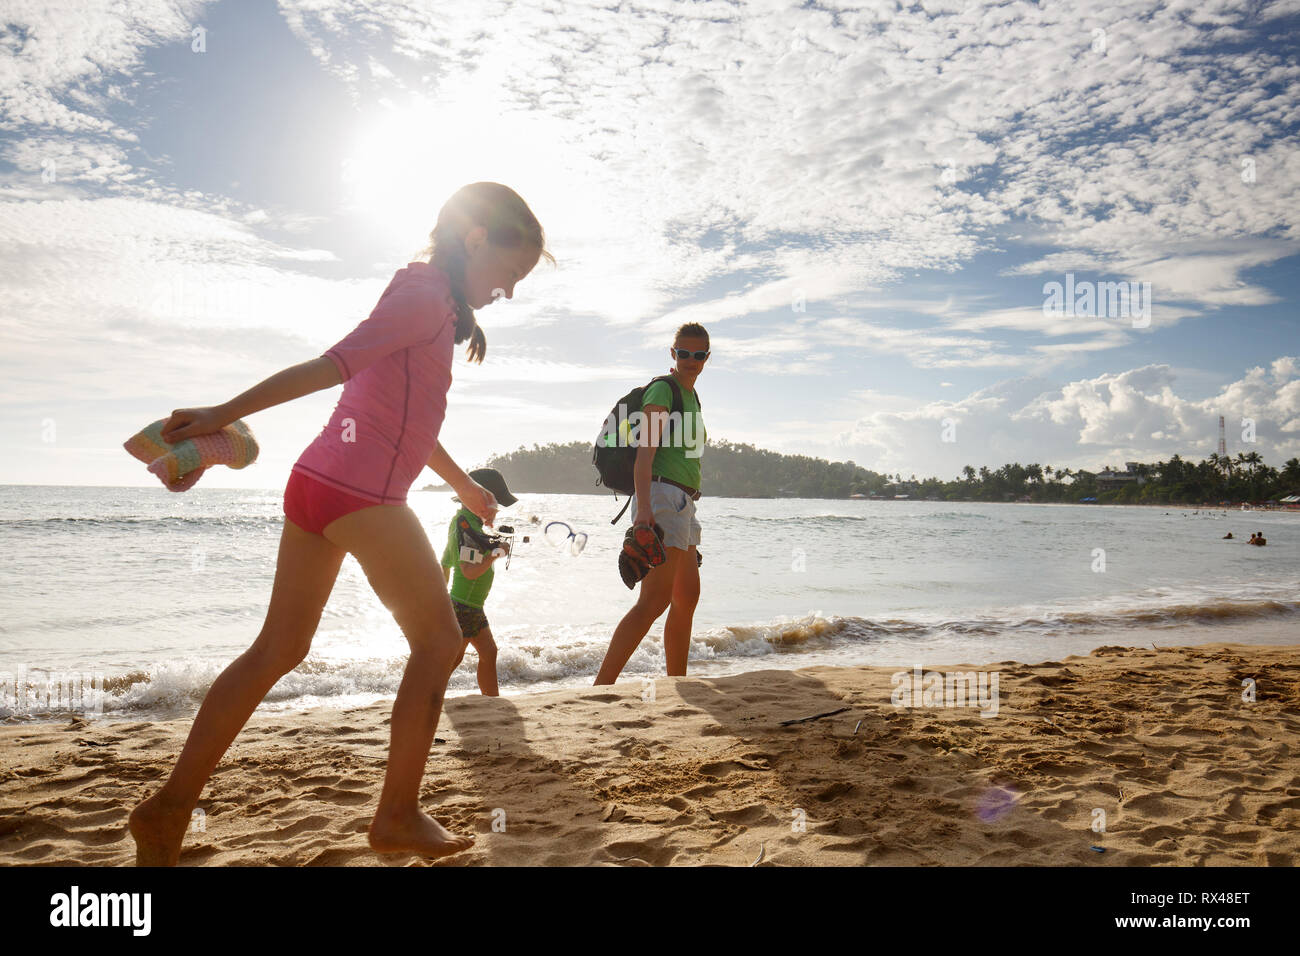 Mother with children enjoying a tropical beach hike. Travelling with children, beach hopping, family time, active lifestyle, beach fun concept. Stock Photo